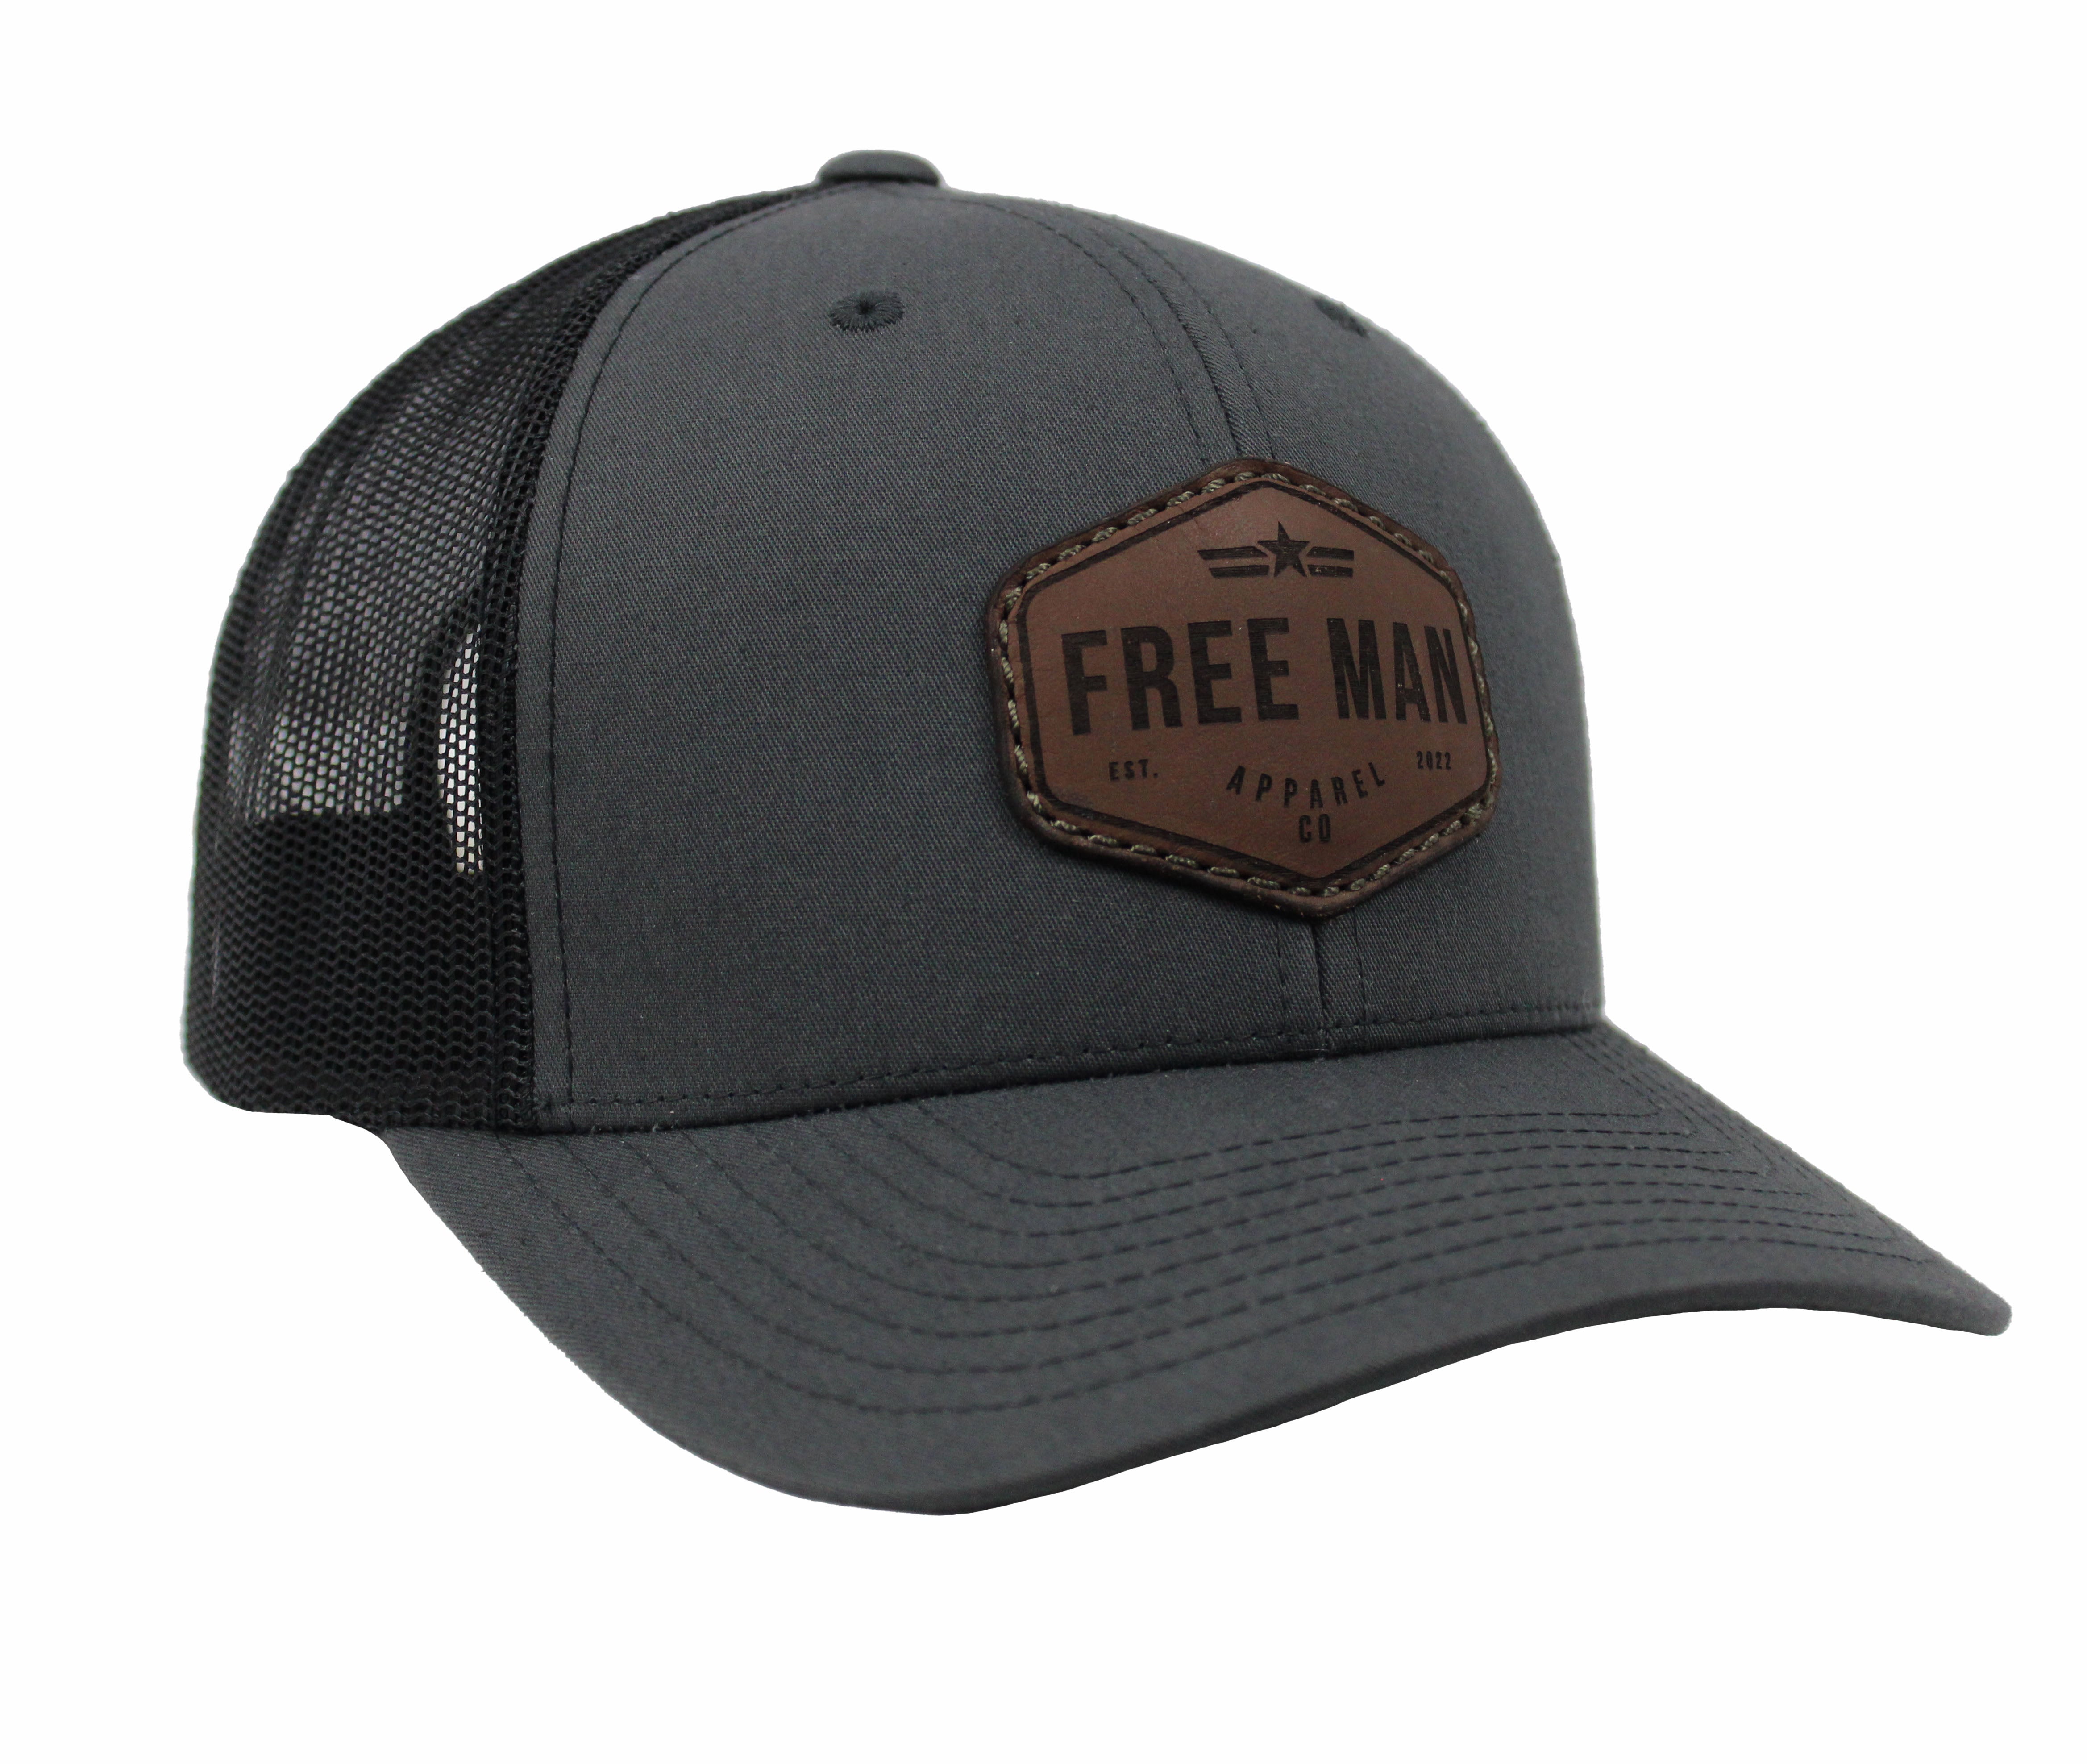 Trucker Founder Man Charcoal Free Apparel in Retro The –